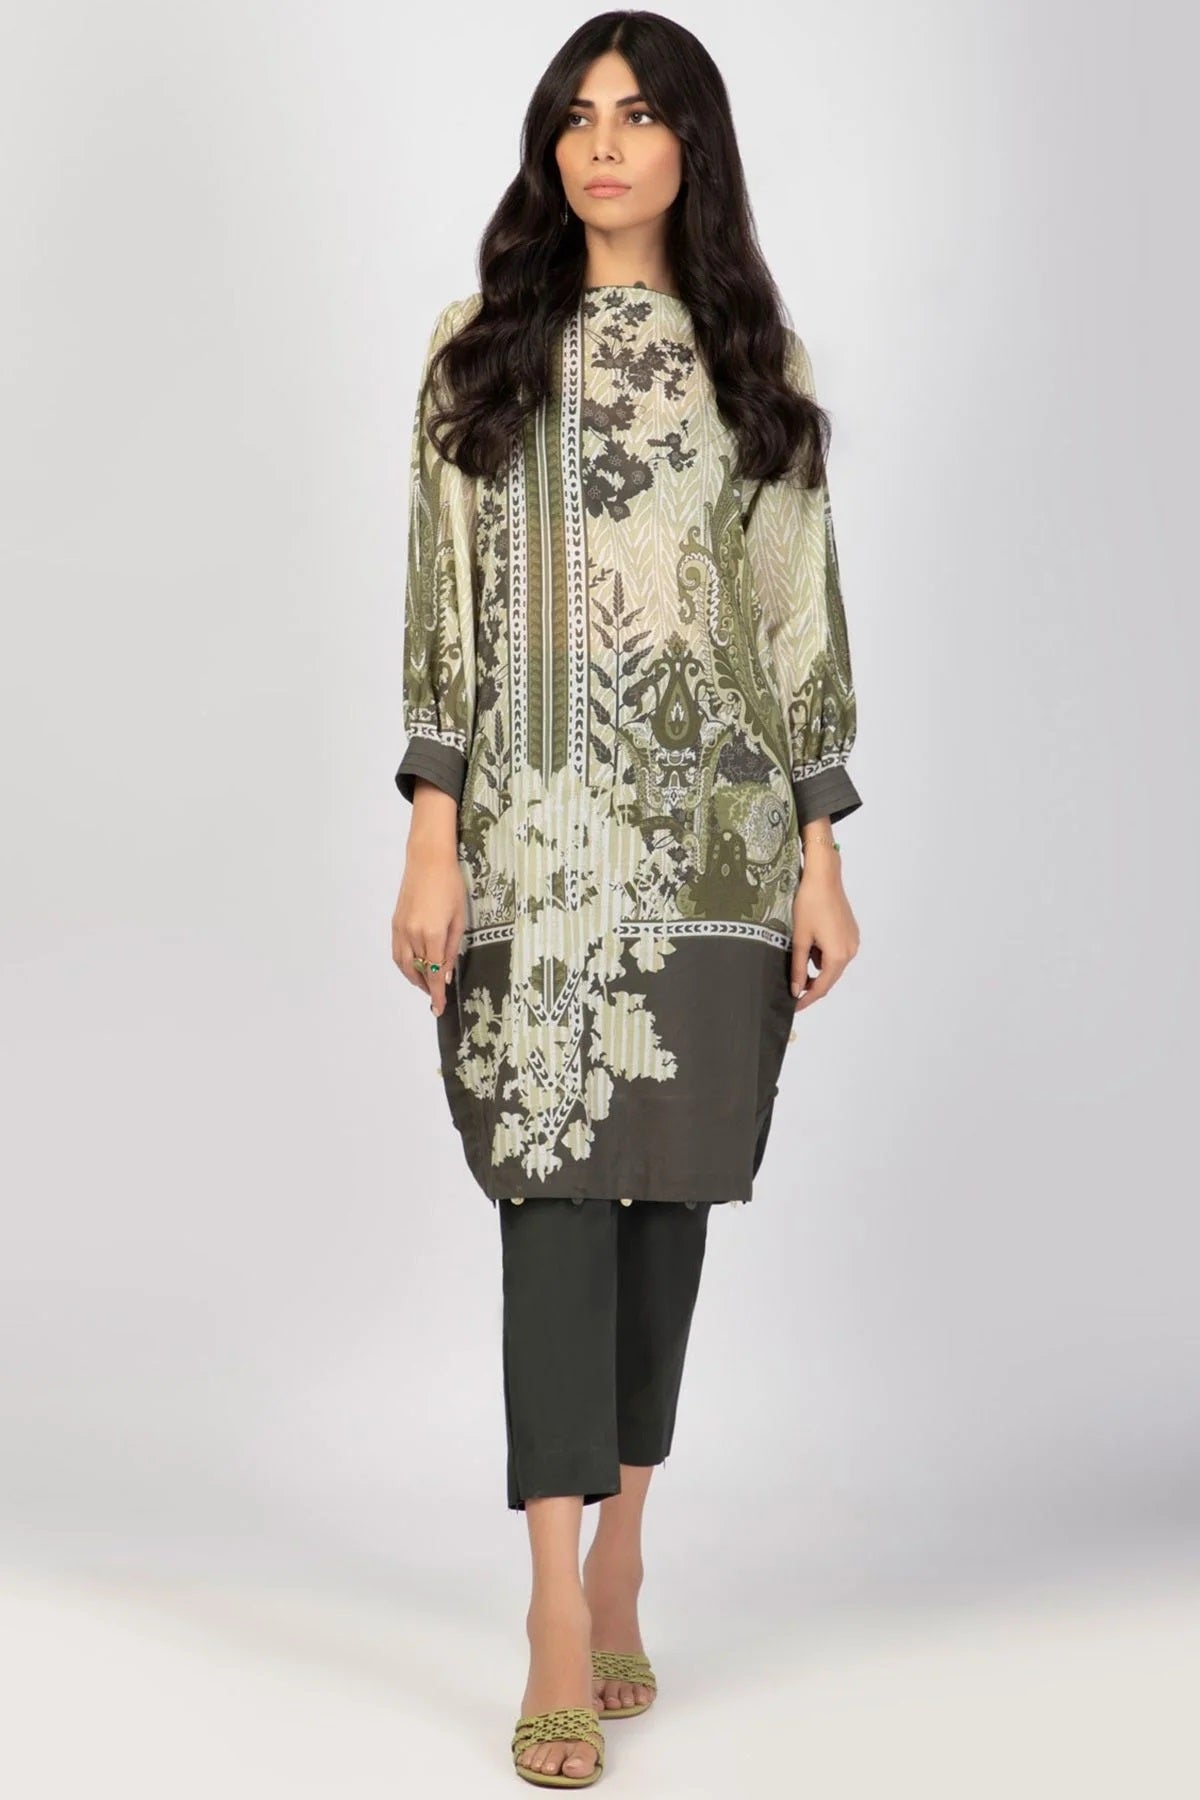 Al Karam Printed Lawn Suits Unstitched 2 Piece SS-53-22 Green - Summer Collection